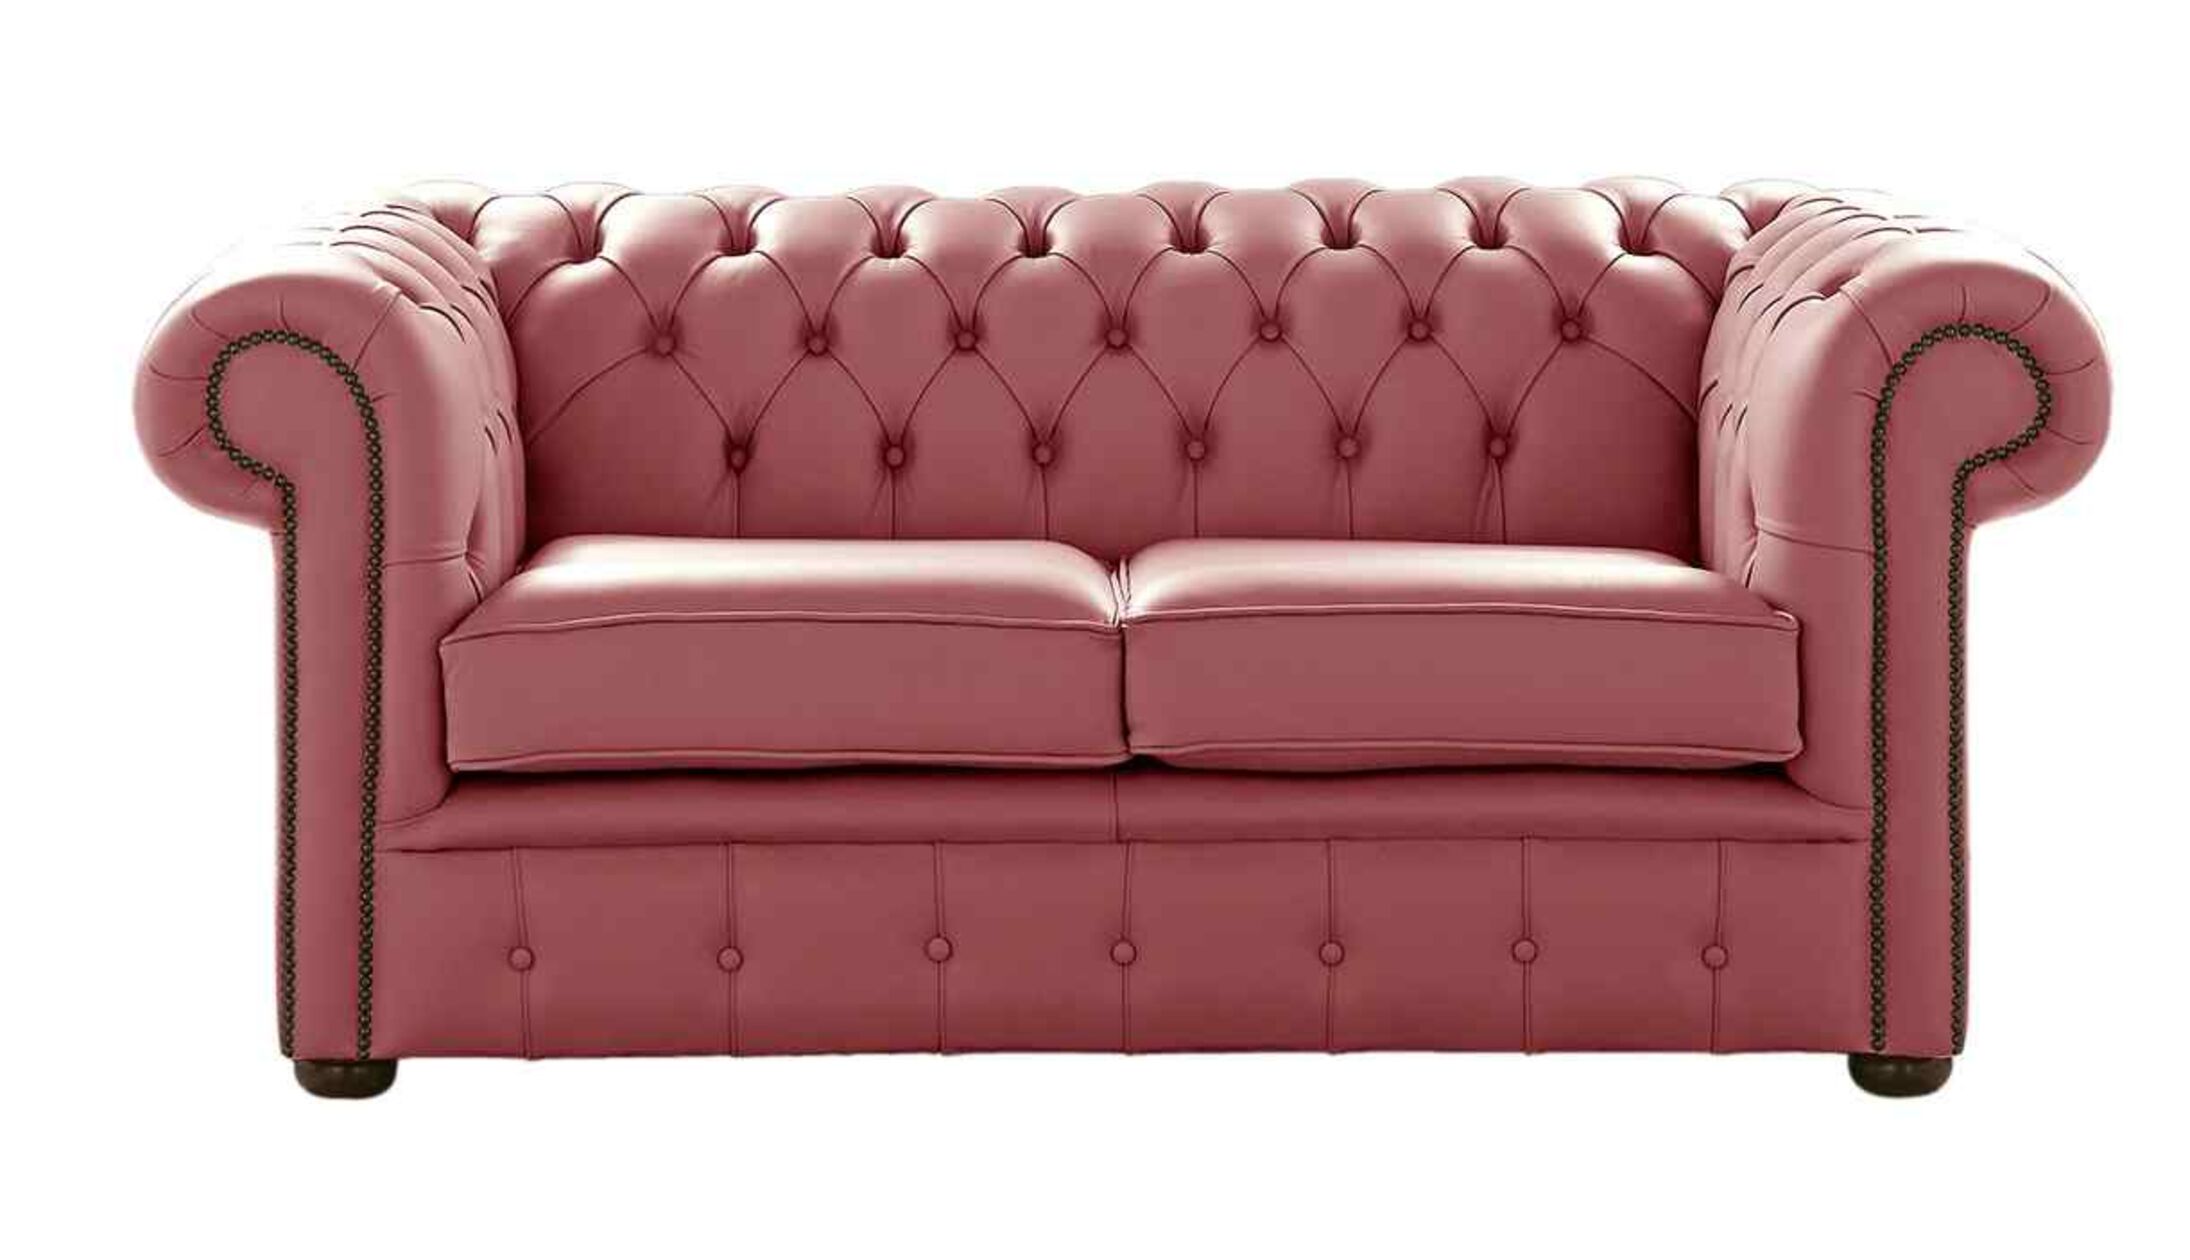 the brick leather sofa reviews